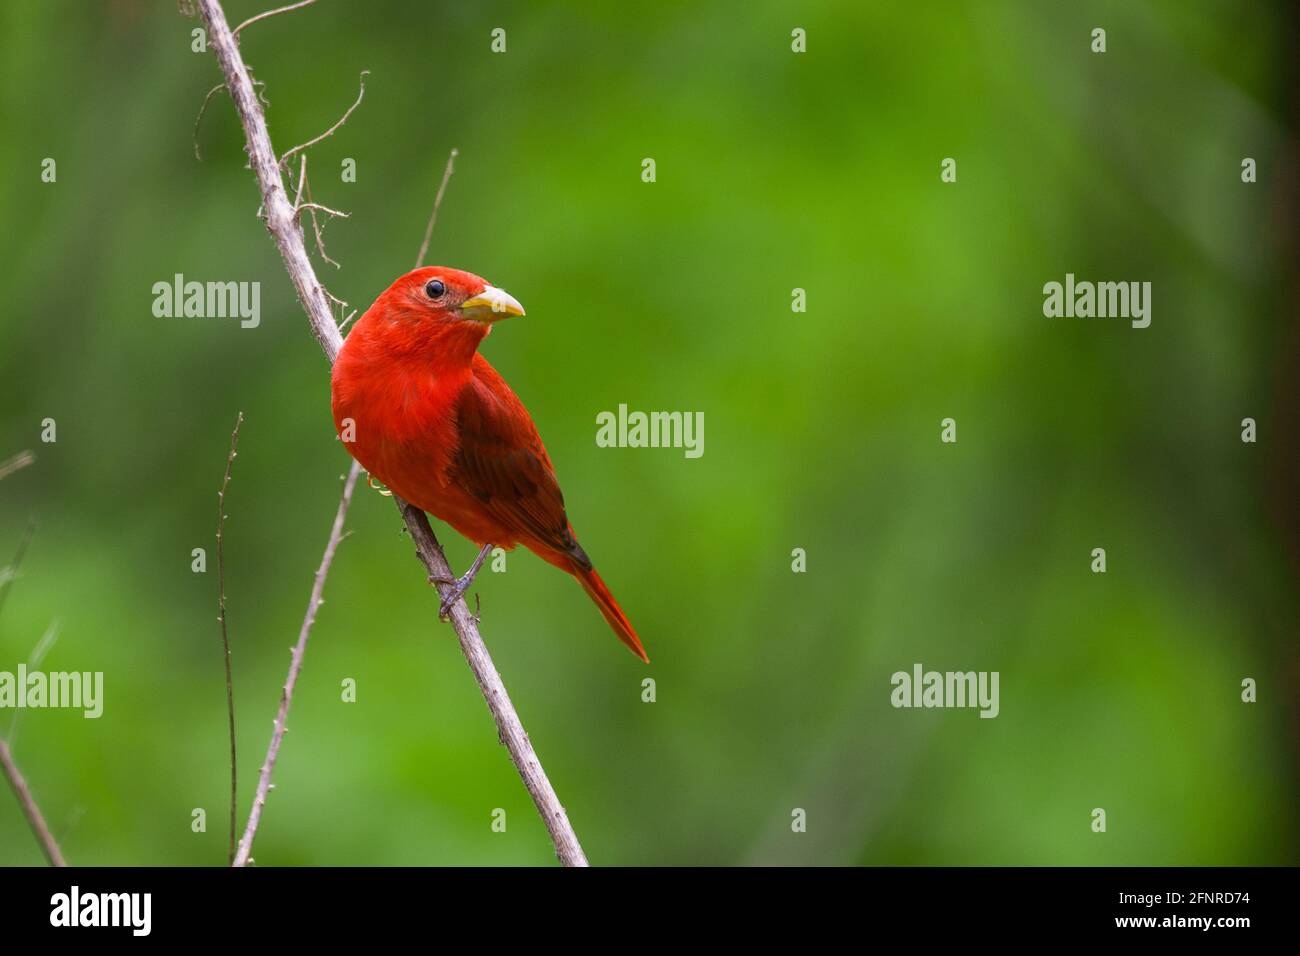 A male summer tanager perched on a dead branch looking right towards a large open space on the right side of the frame.  The background is green. Stock Photo